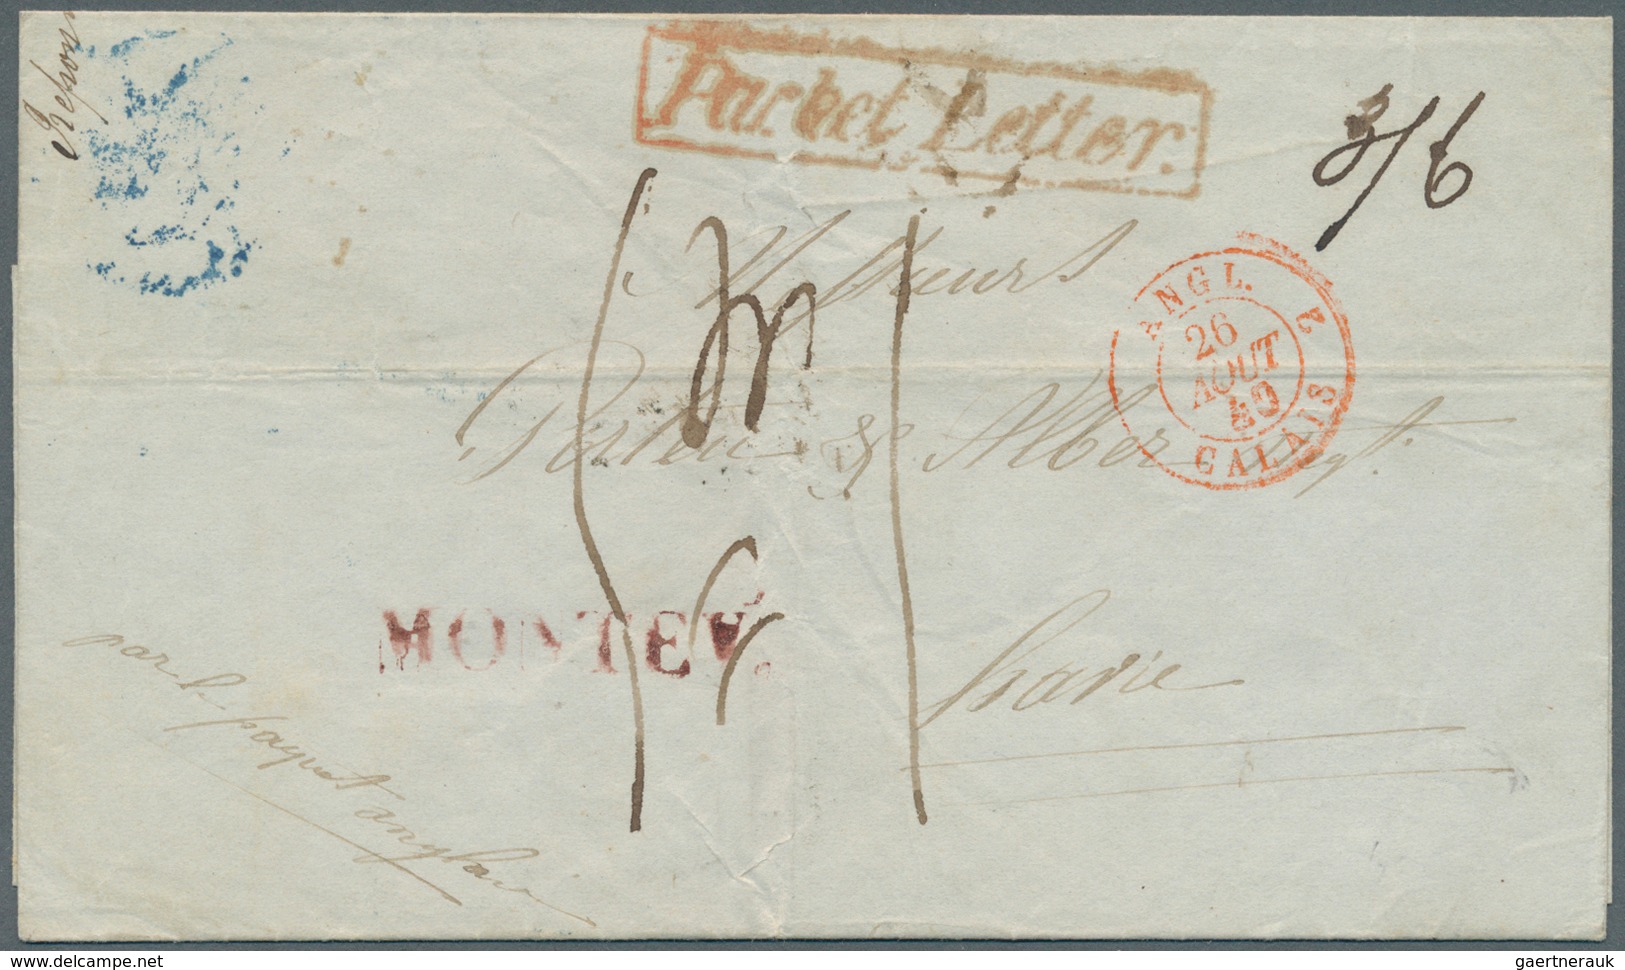 Uruguay: 1840. Stamp-less Envelope Addressed To France Written From Montevideo Dated 'May 15' With H - Uruguay